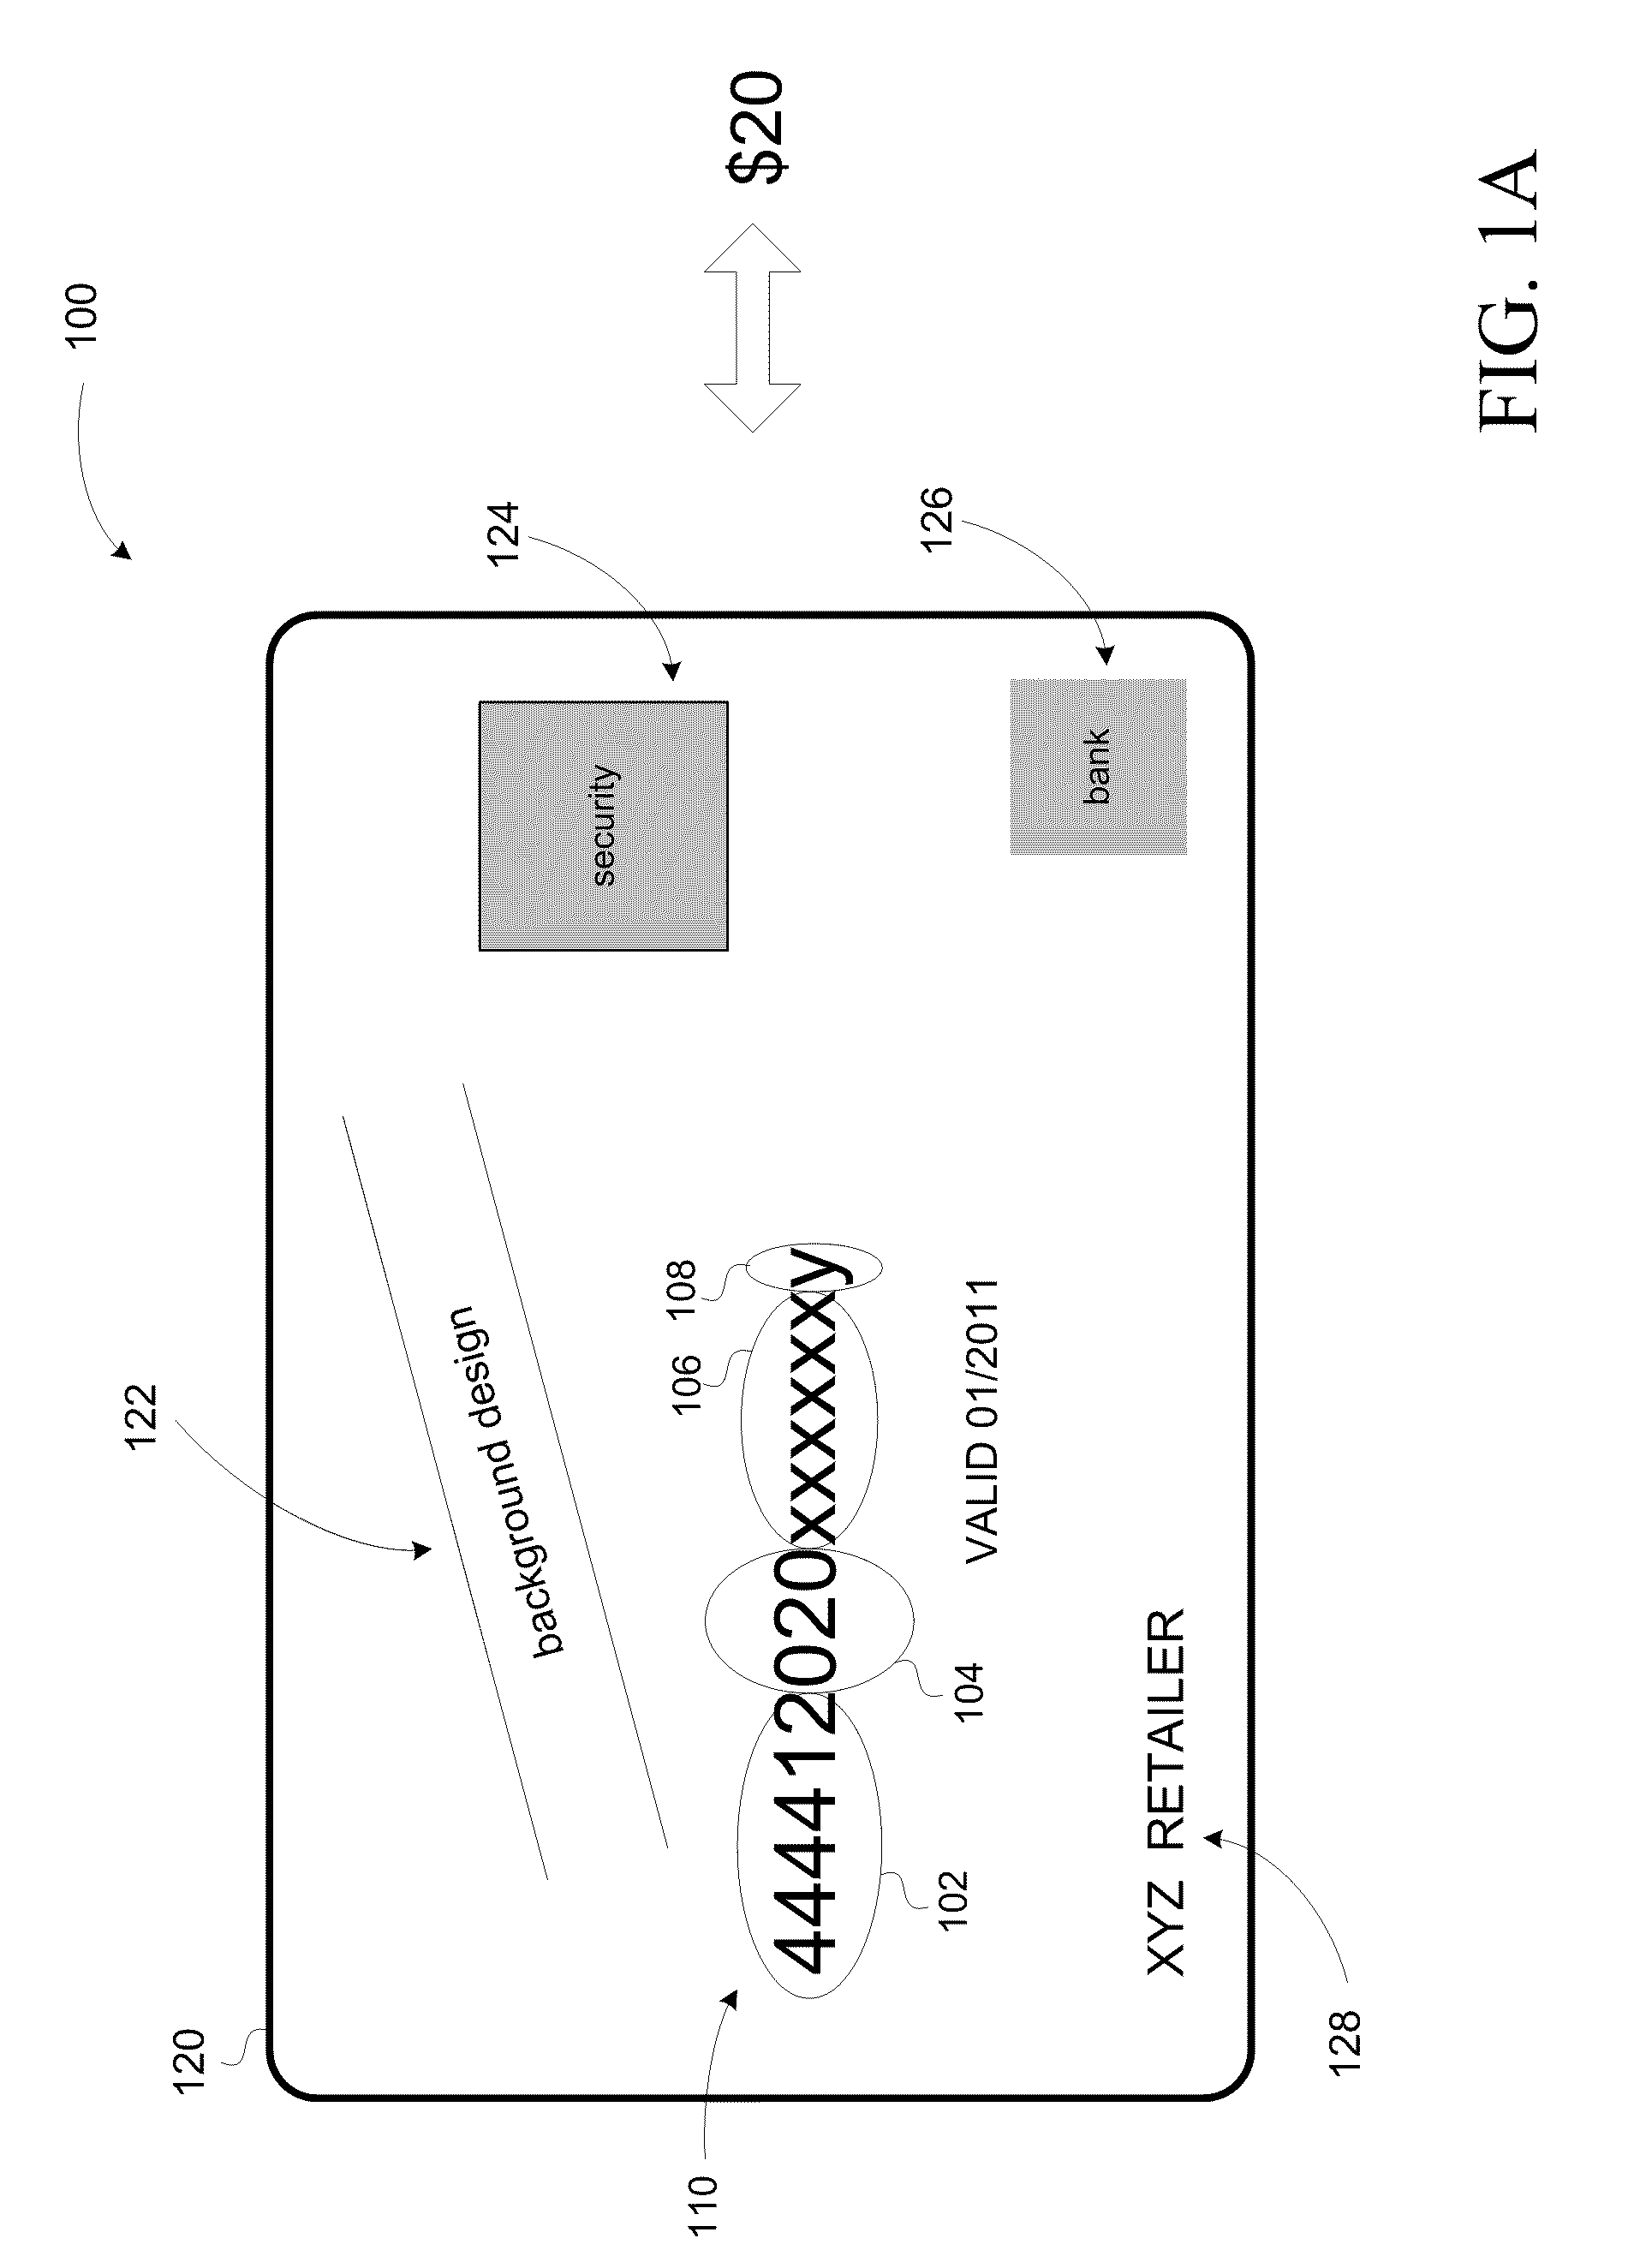 Card including account number with value amount